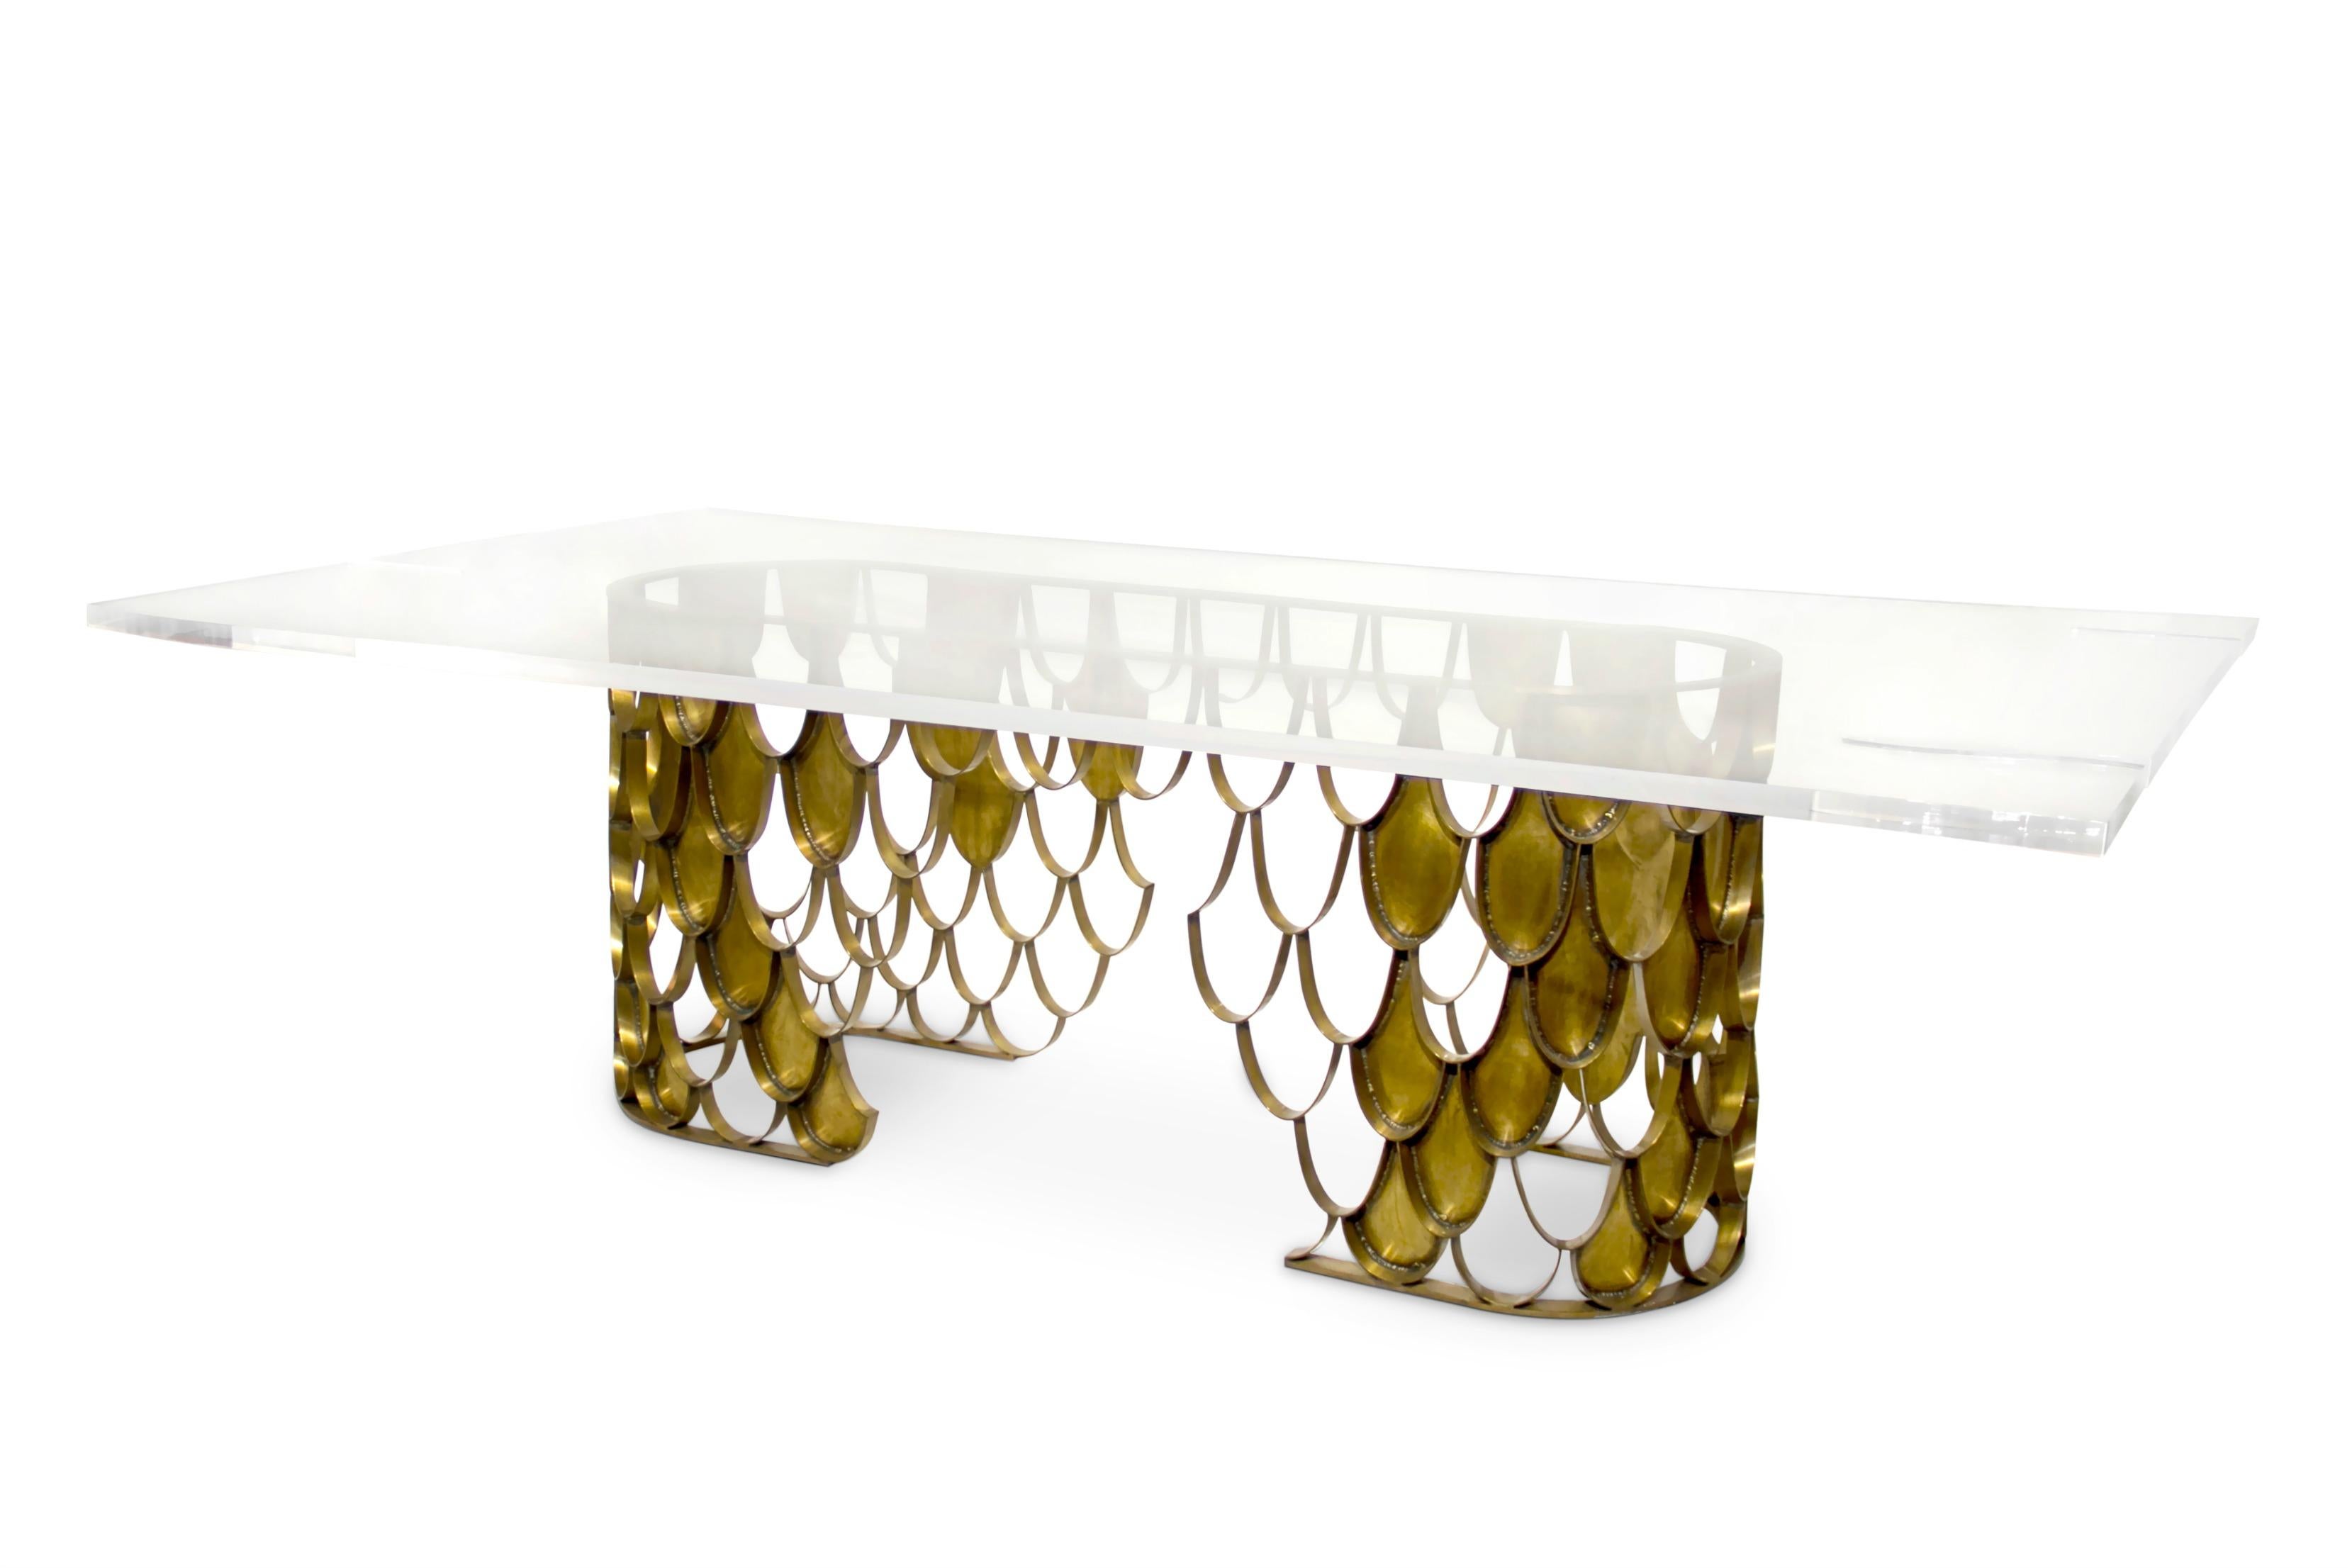 Koi carp is a recurring symbol of Japanese culture. Its natural color mutations reveal their capacity to adapt, just like KOI dining table. Featuring a base in aged brass & a top in acrylic, this rectangular dining table will add refined elegance to